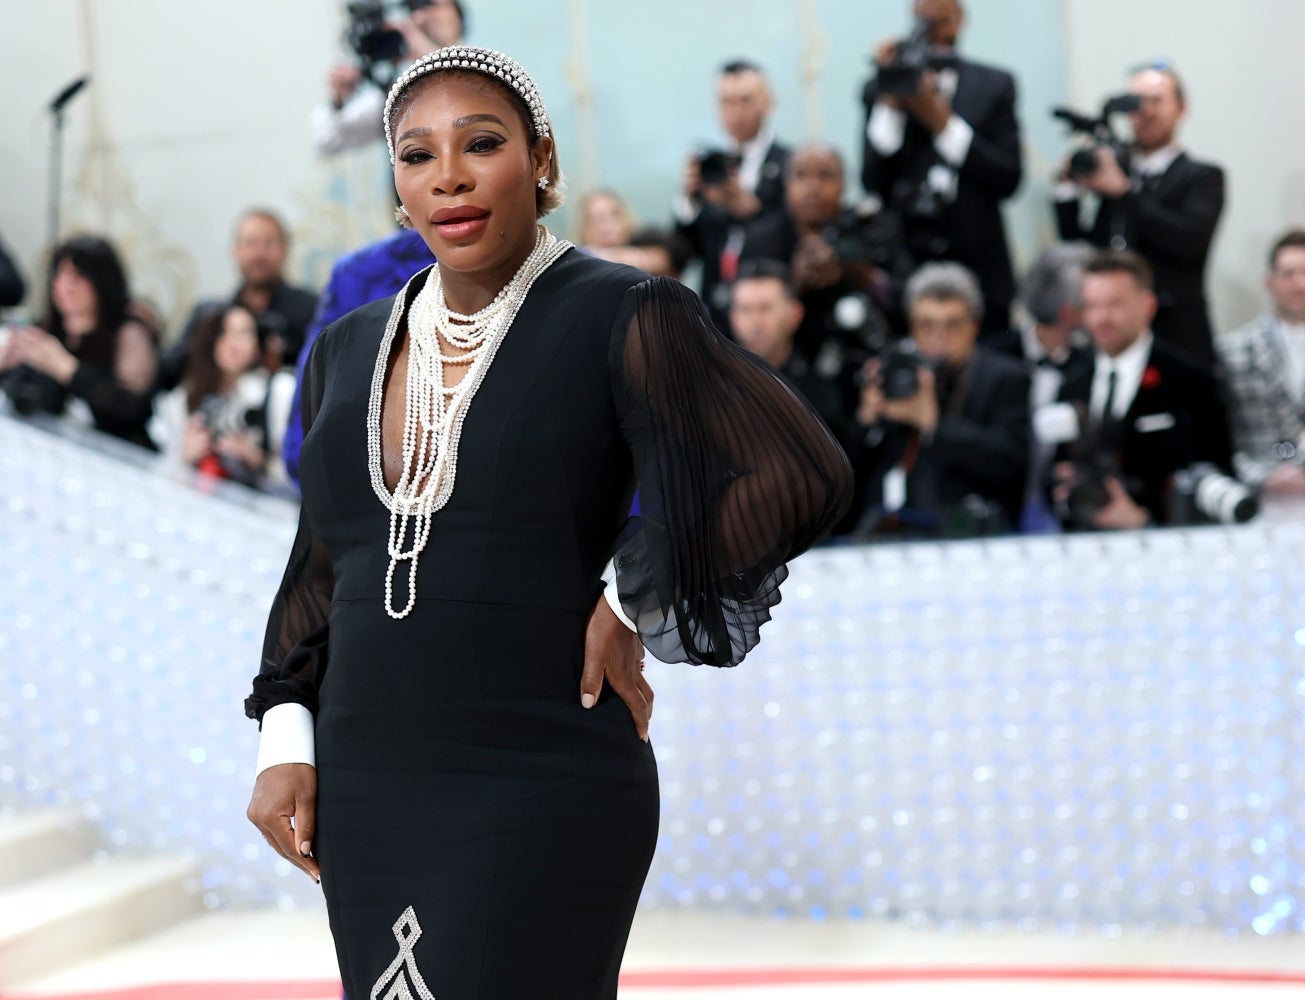 Met Gala Mama! Serena Williams Announces She’s Expecting Baby No. 2